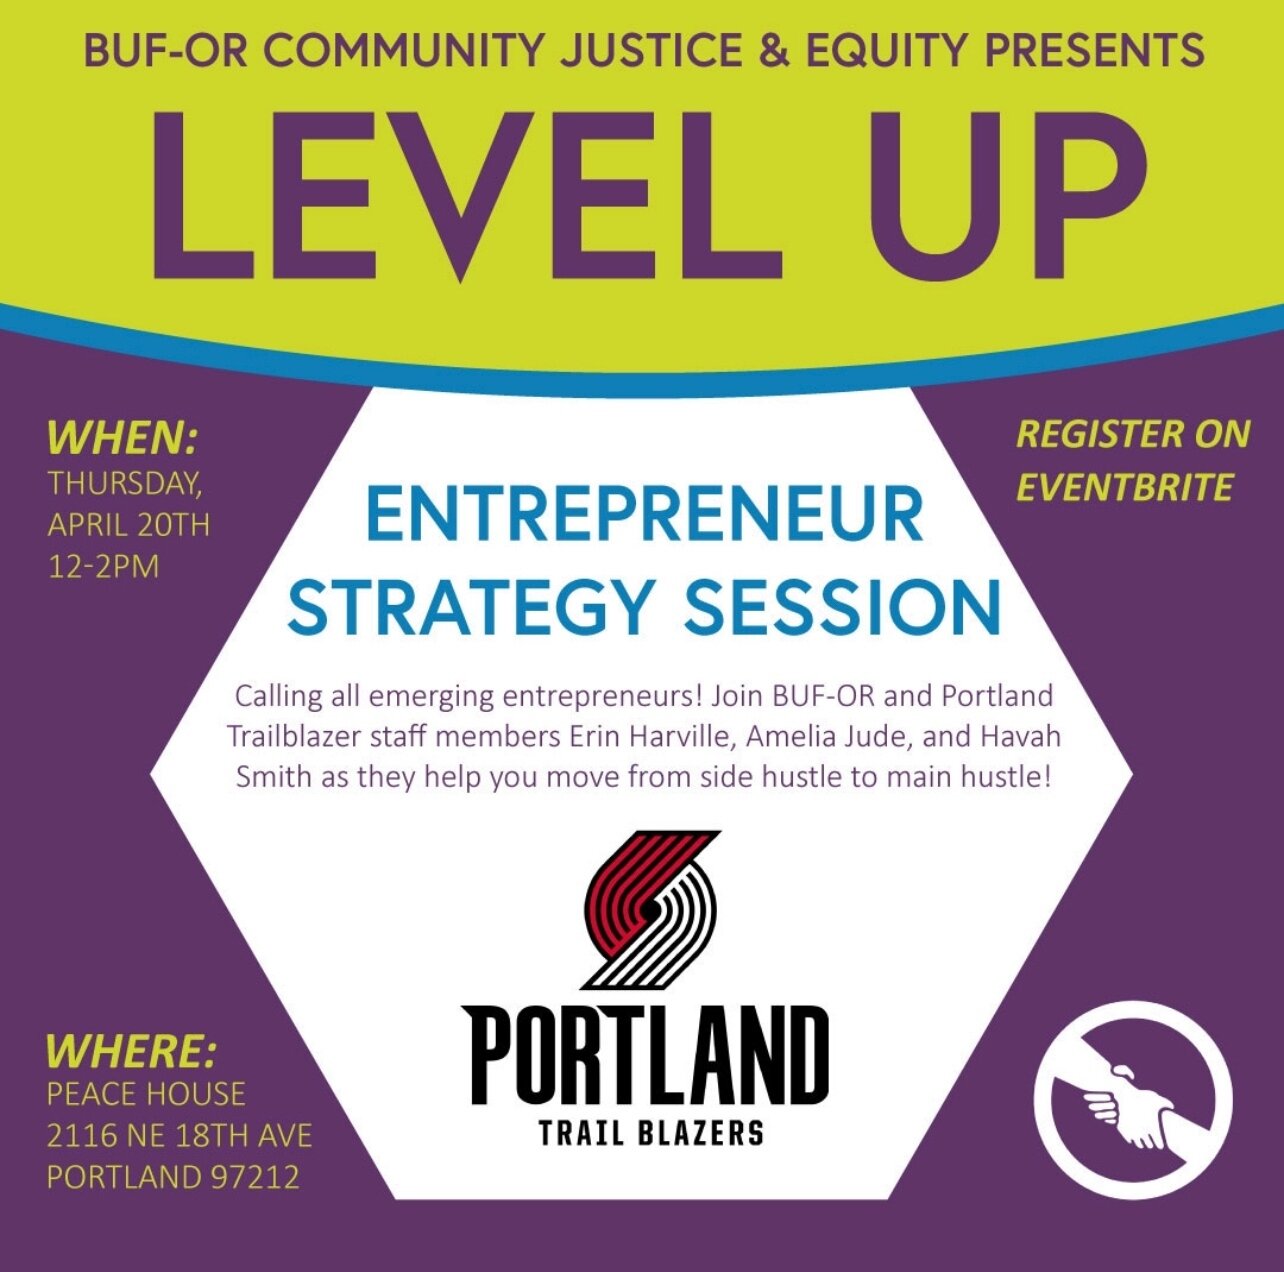 Tomorrow! 4/20
Link In Bio!
@blackunitedfundor

&ldquo;Join BUF-OR and Trailblazer staff
members for a Q&amp;A session focused on emerging BIPOC
entrepreneurs.

We will focus on:
-Brand Marketing
-Digital Marketing
-Time Management and Productivity
A